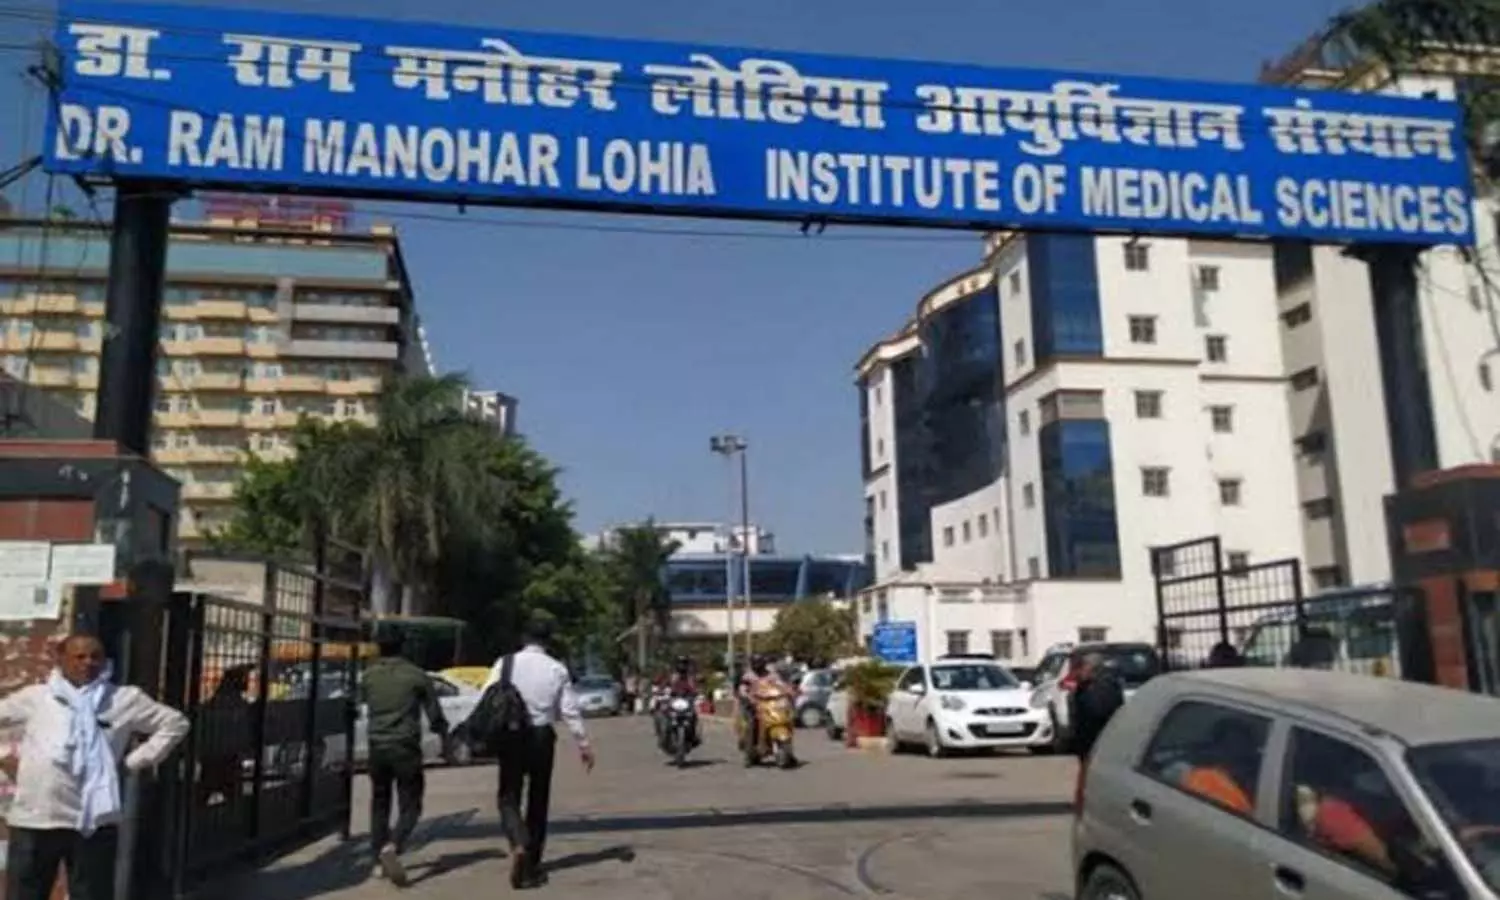 Two new courses started in Lohia Institute, doctors doing MD, MS and DM, MCh will be able to apply